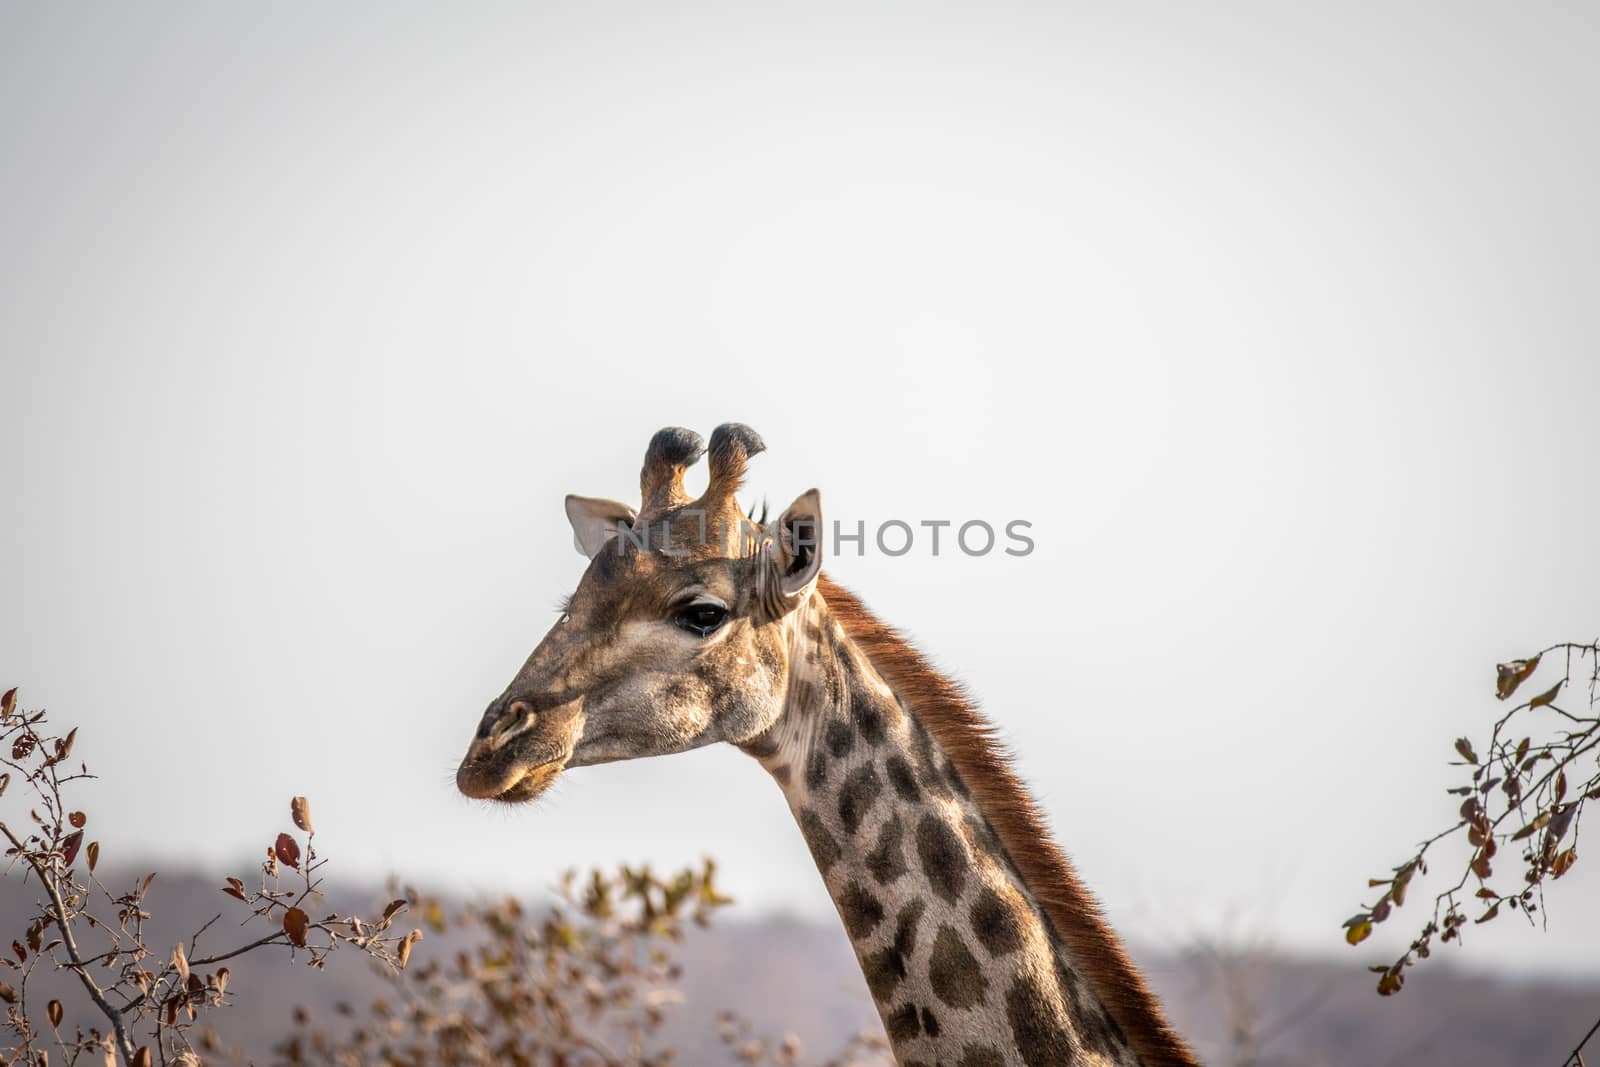 Side profile of a Giraffe in Africa. by Simoneemanphotography